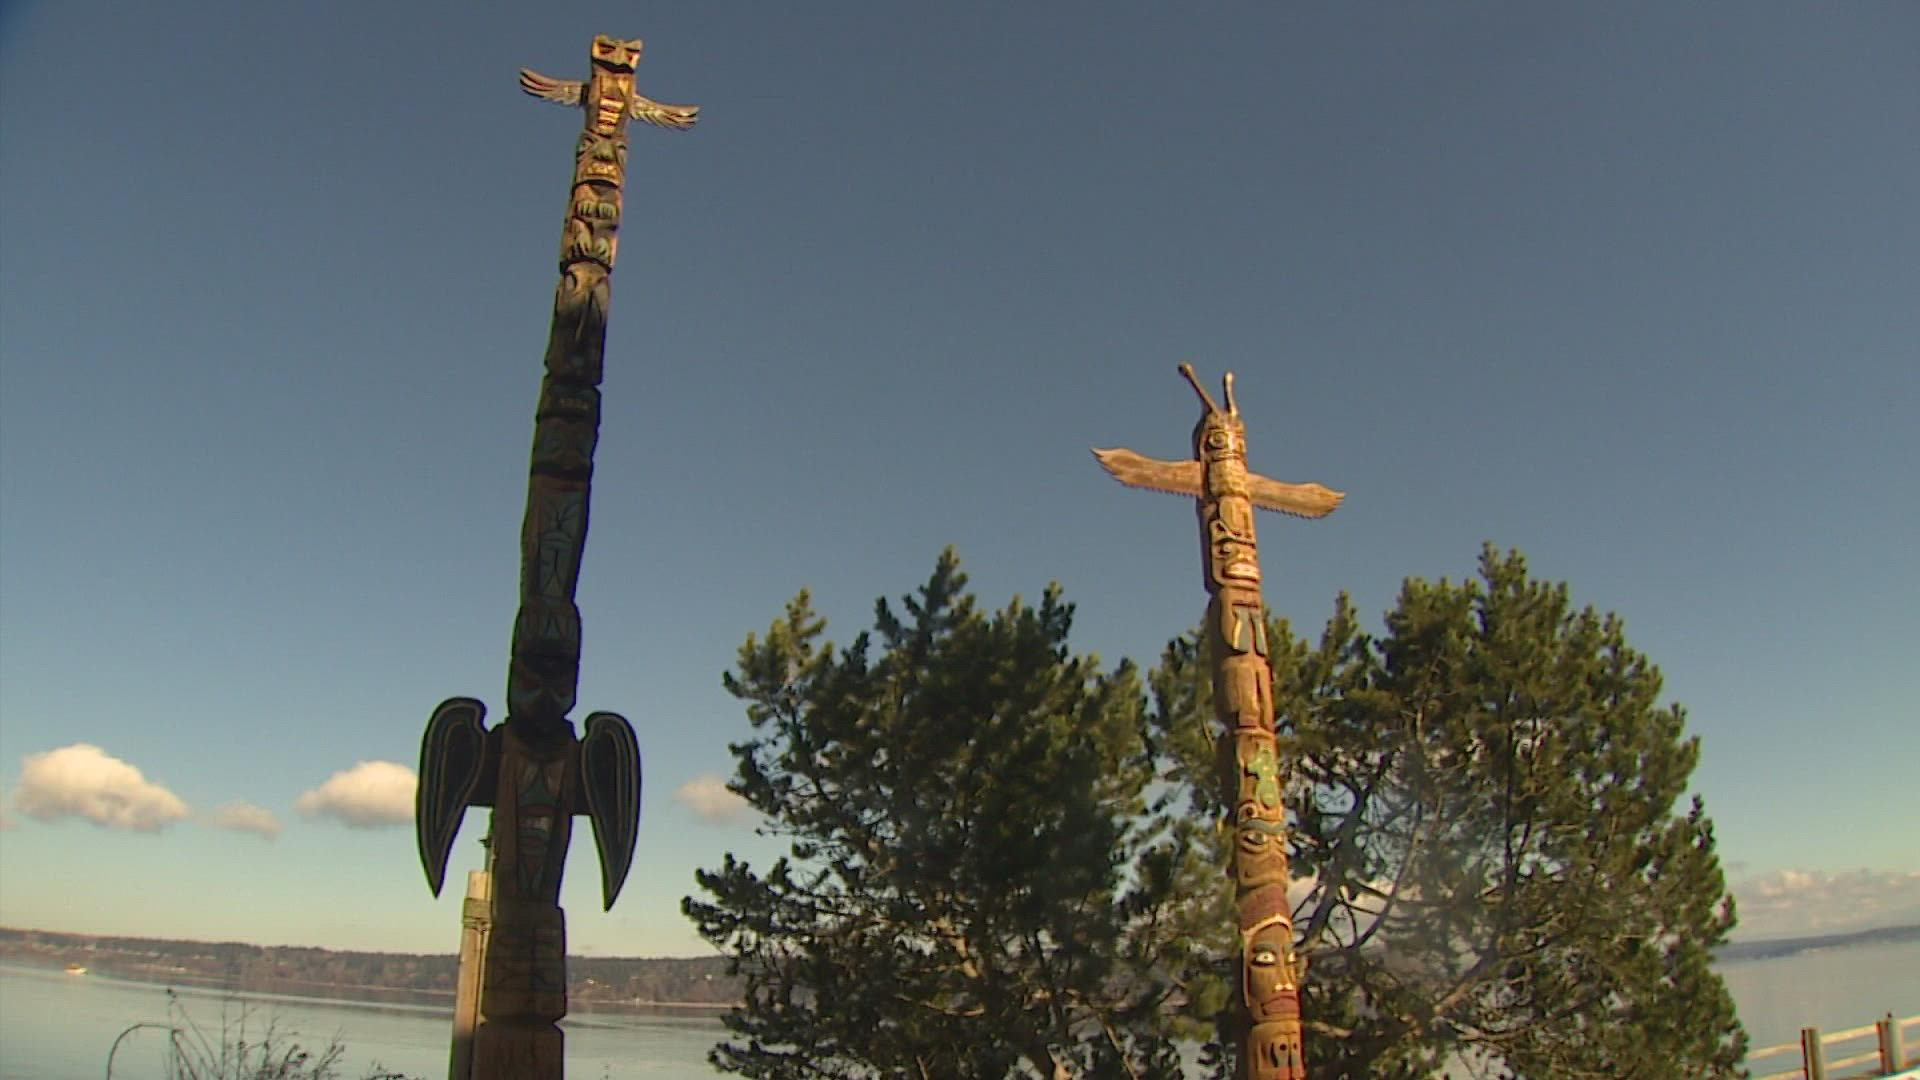 The two totem poles in Langley were actually carved by white people in 1966 and 1975.